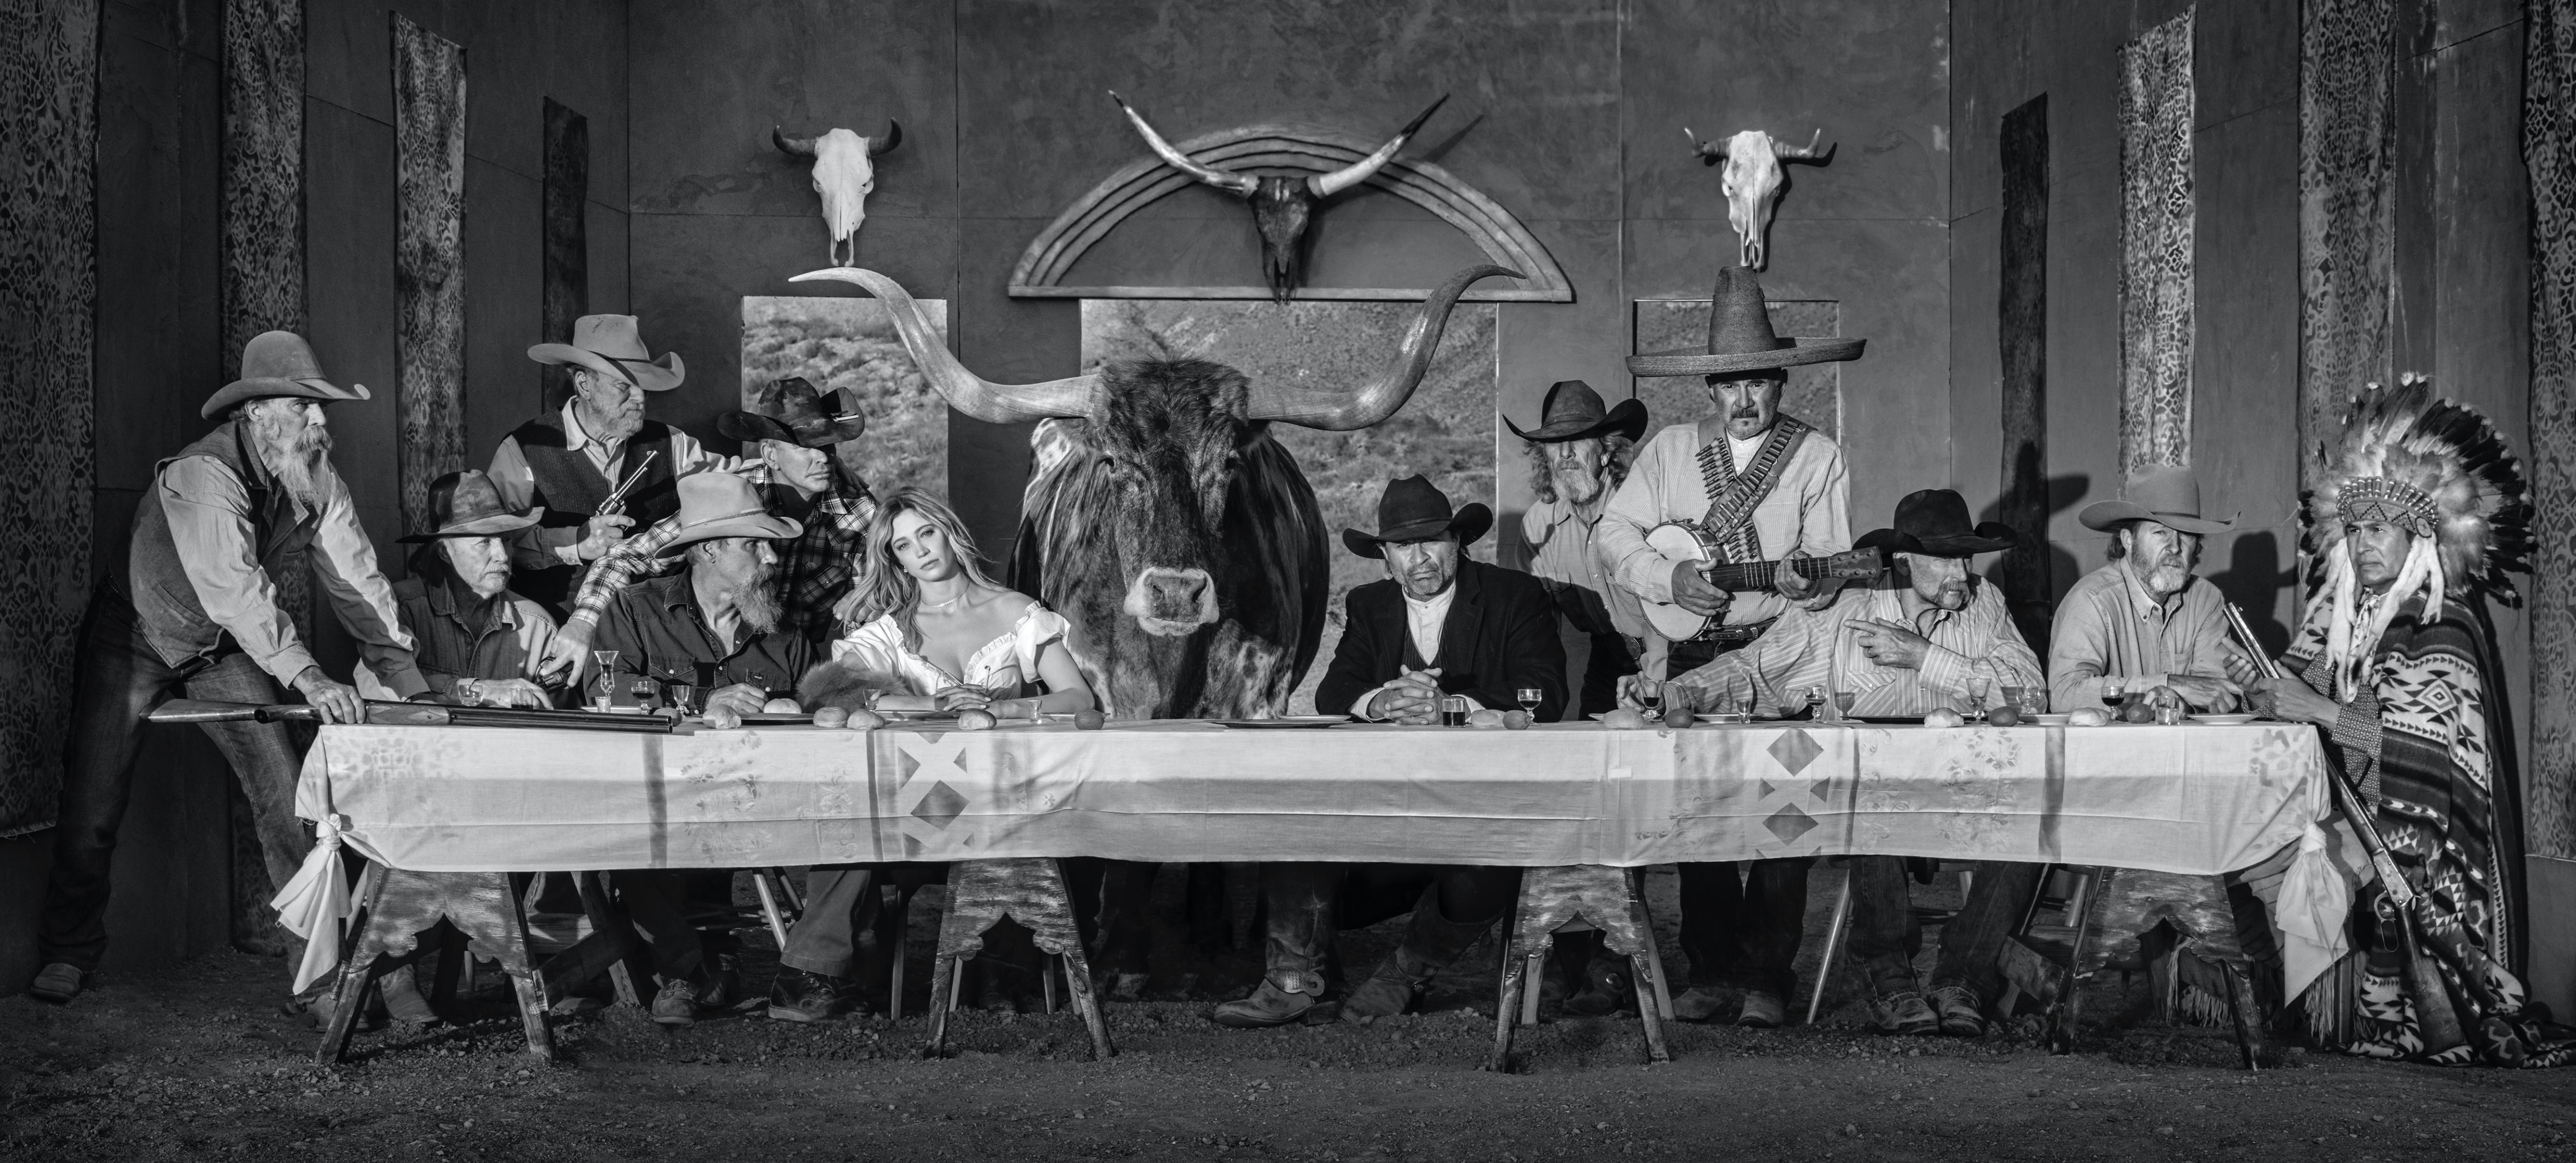 David Yarrow Black and White Photograph - The Last Supper In Texas